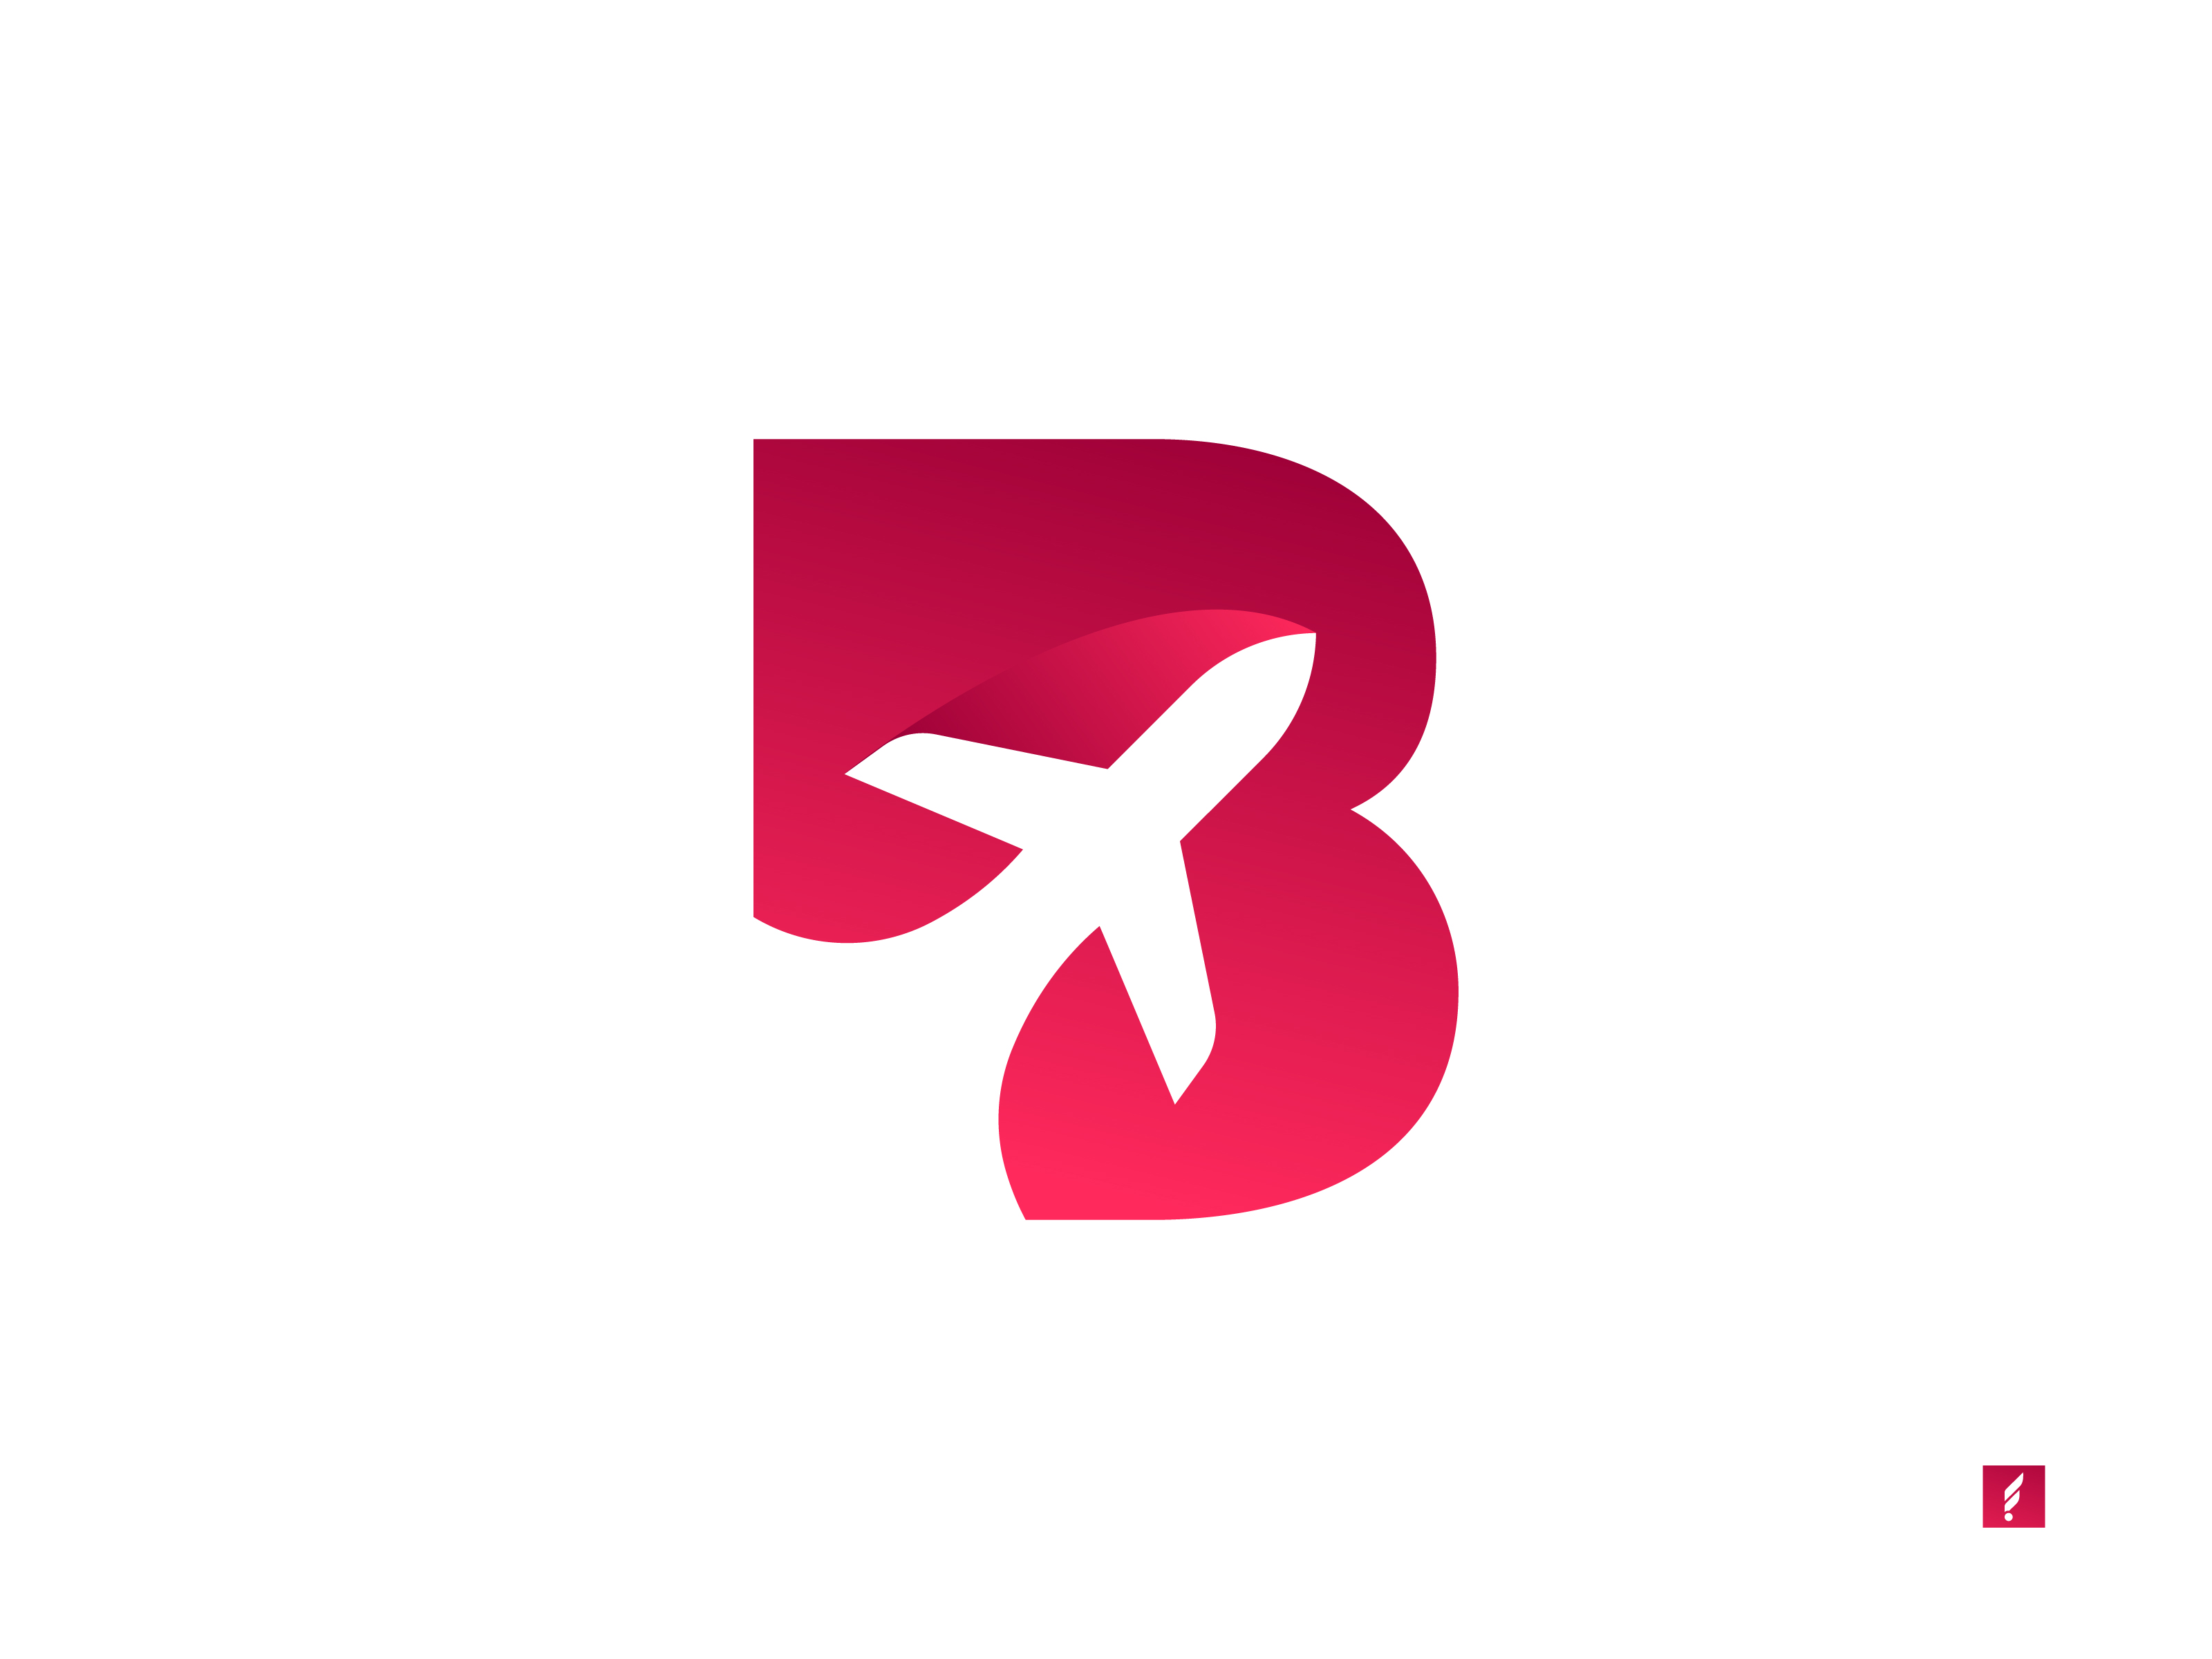 Fire letter b logo icon design Royalty Free Vector Image